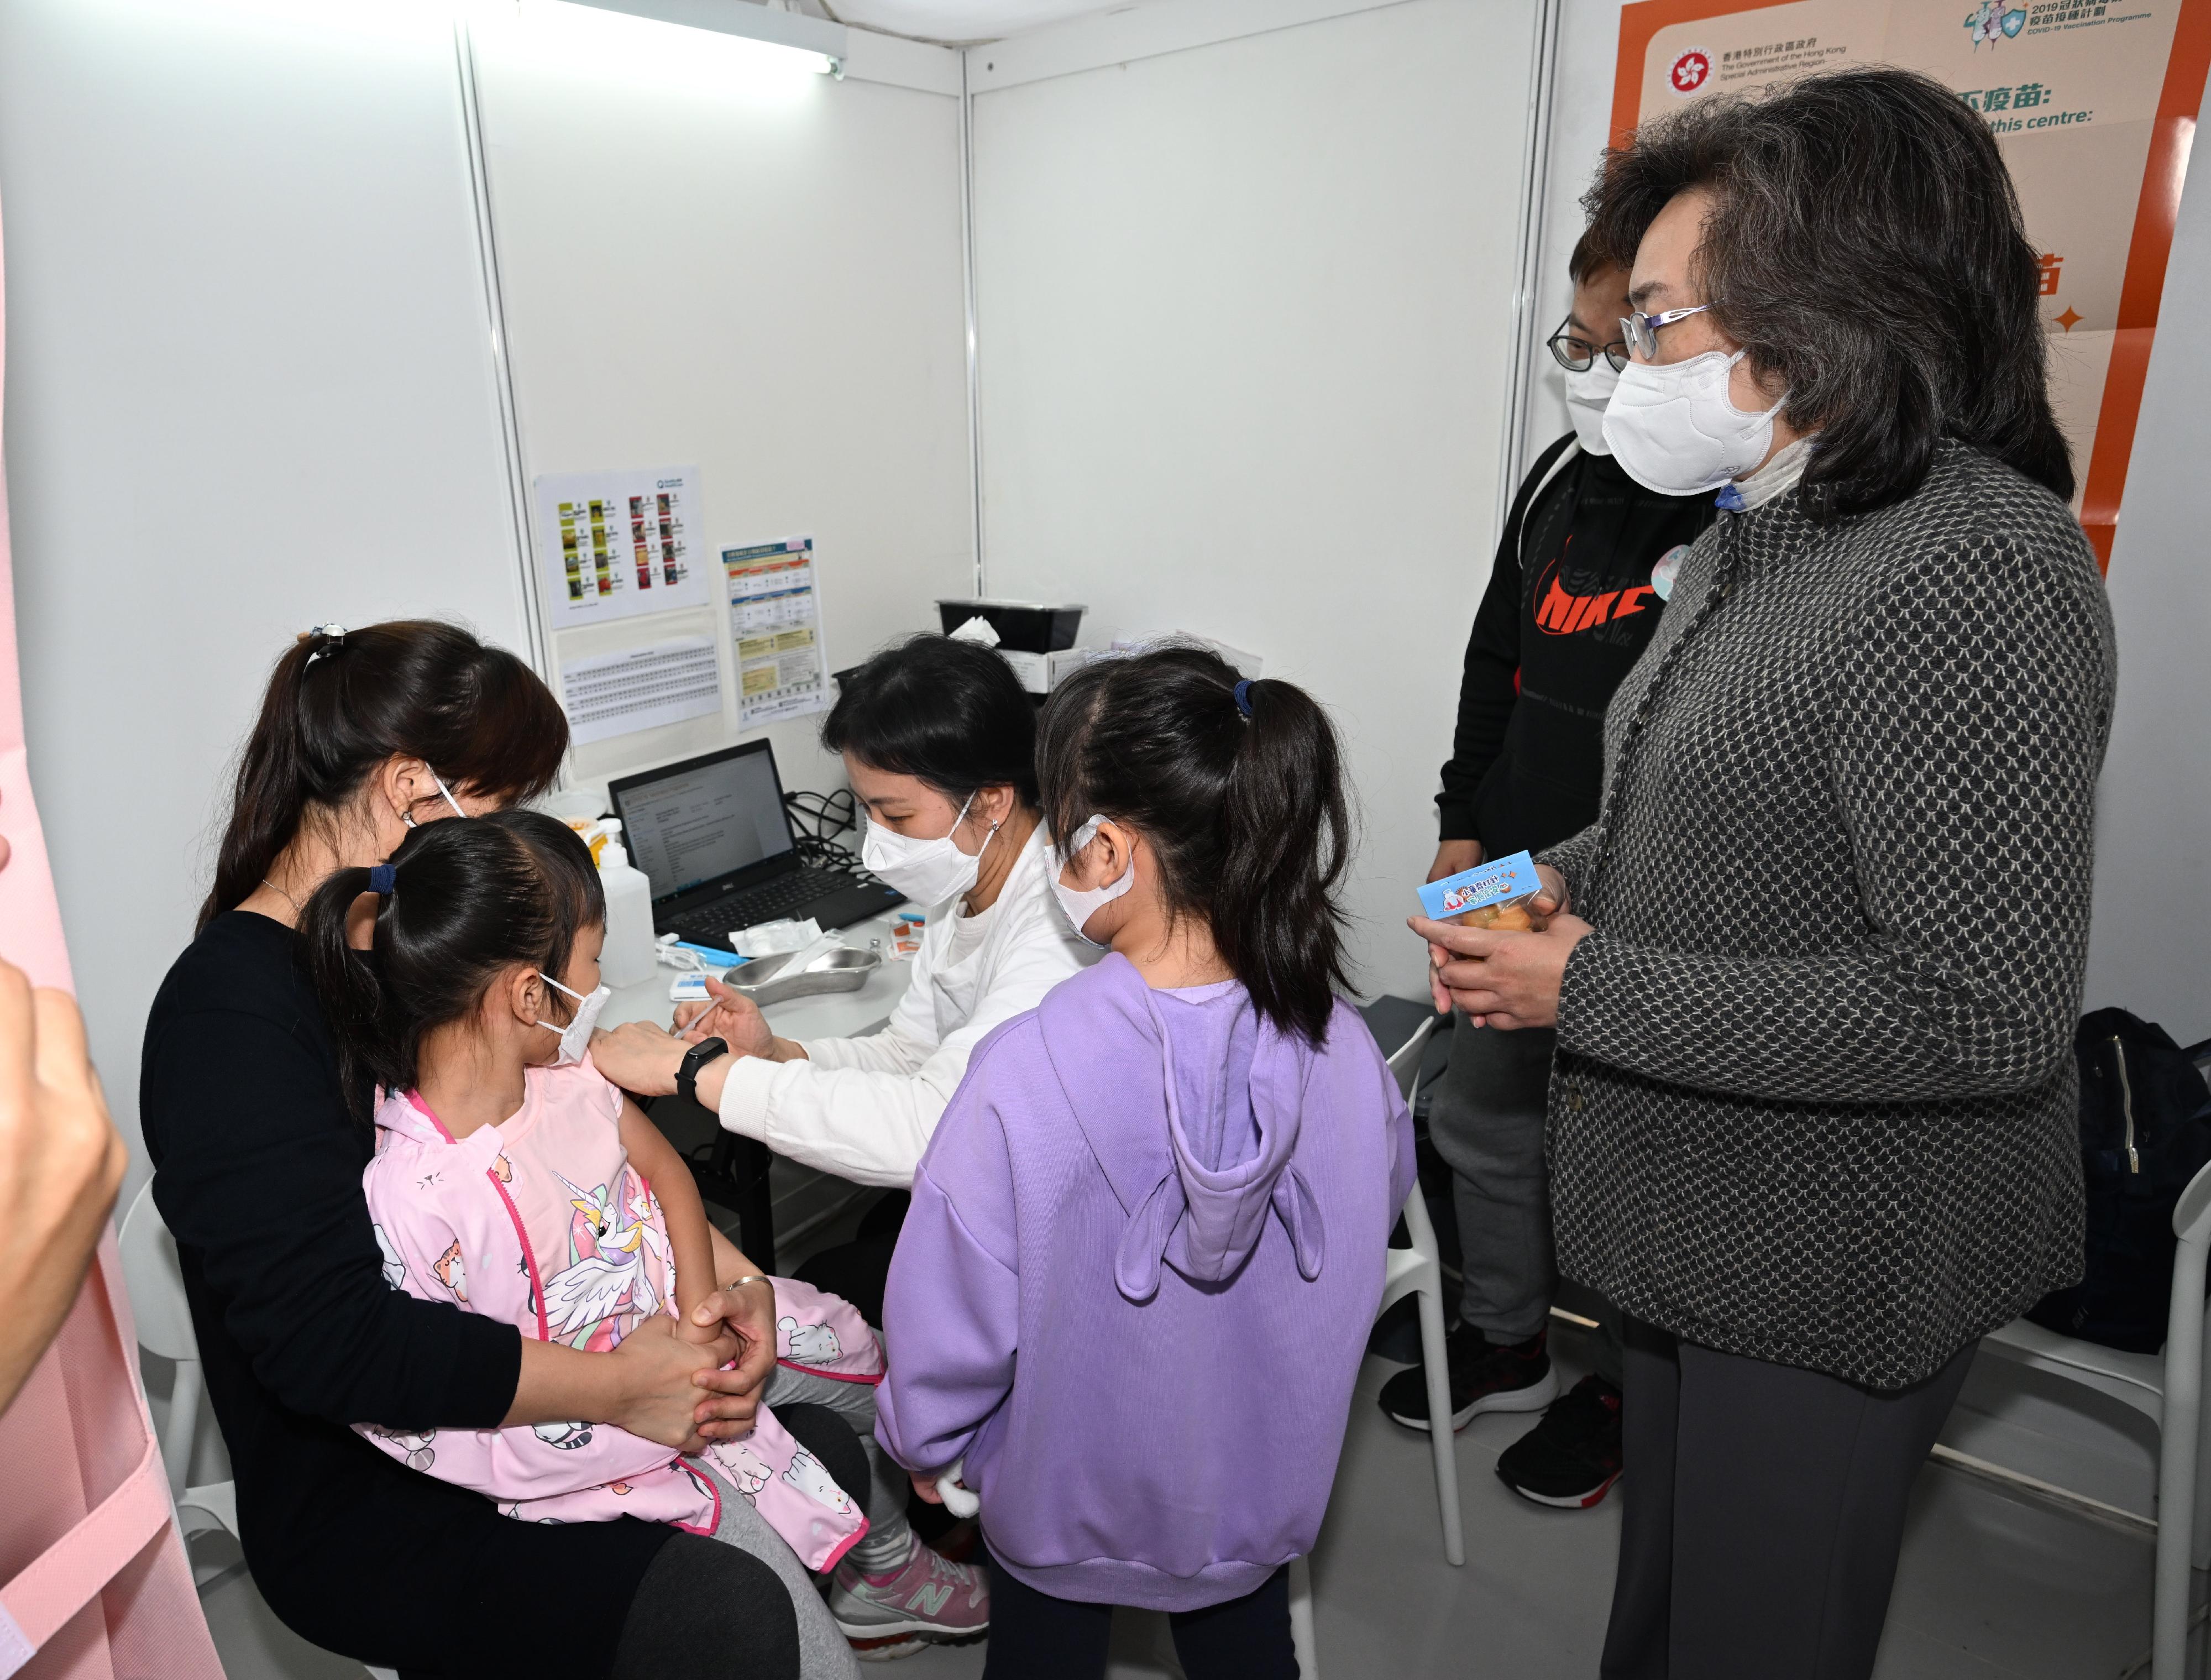 The Secretary for the Civil Service, Mrs Ingrid Yeung, attended "Children with jabs, parents with ease" parent-child activities held by the Government at D·PARK in Tsuen Wan today (December 3) to promote COVID-19 vaccination of children. A mobile vaccination station was set up at the venue providing vaccination service of five kinds of COVID-19 vaccine (the Sinvoac vaccine, the BioNTech bivalent vaccine, the BioNTech ancestral strain vaccine, and the paediatric and toddler formulations of the BioNTech vaccine) for members of the public of different ages to receive on site. Mrs Yeung (first right) is pictured with a child who is receiving her COVID-19 vaccination.